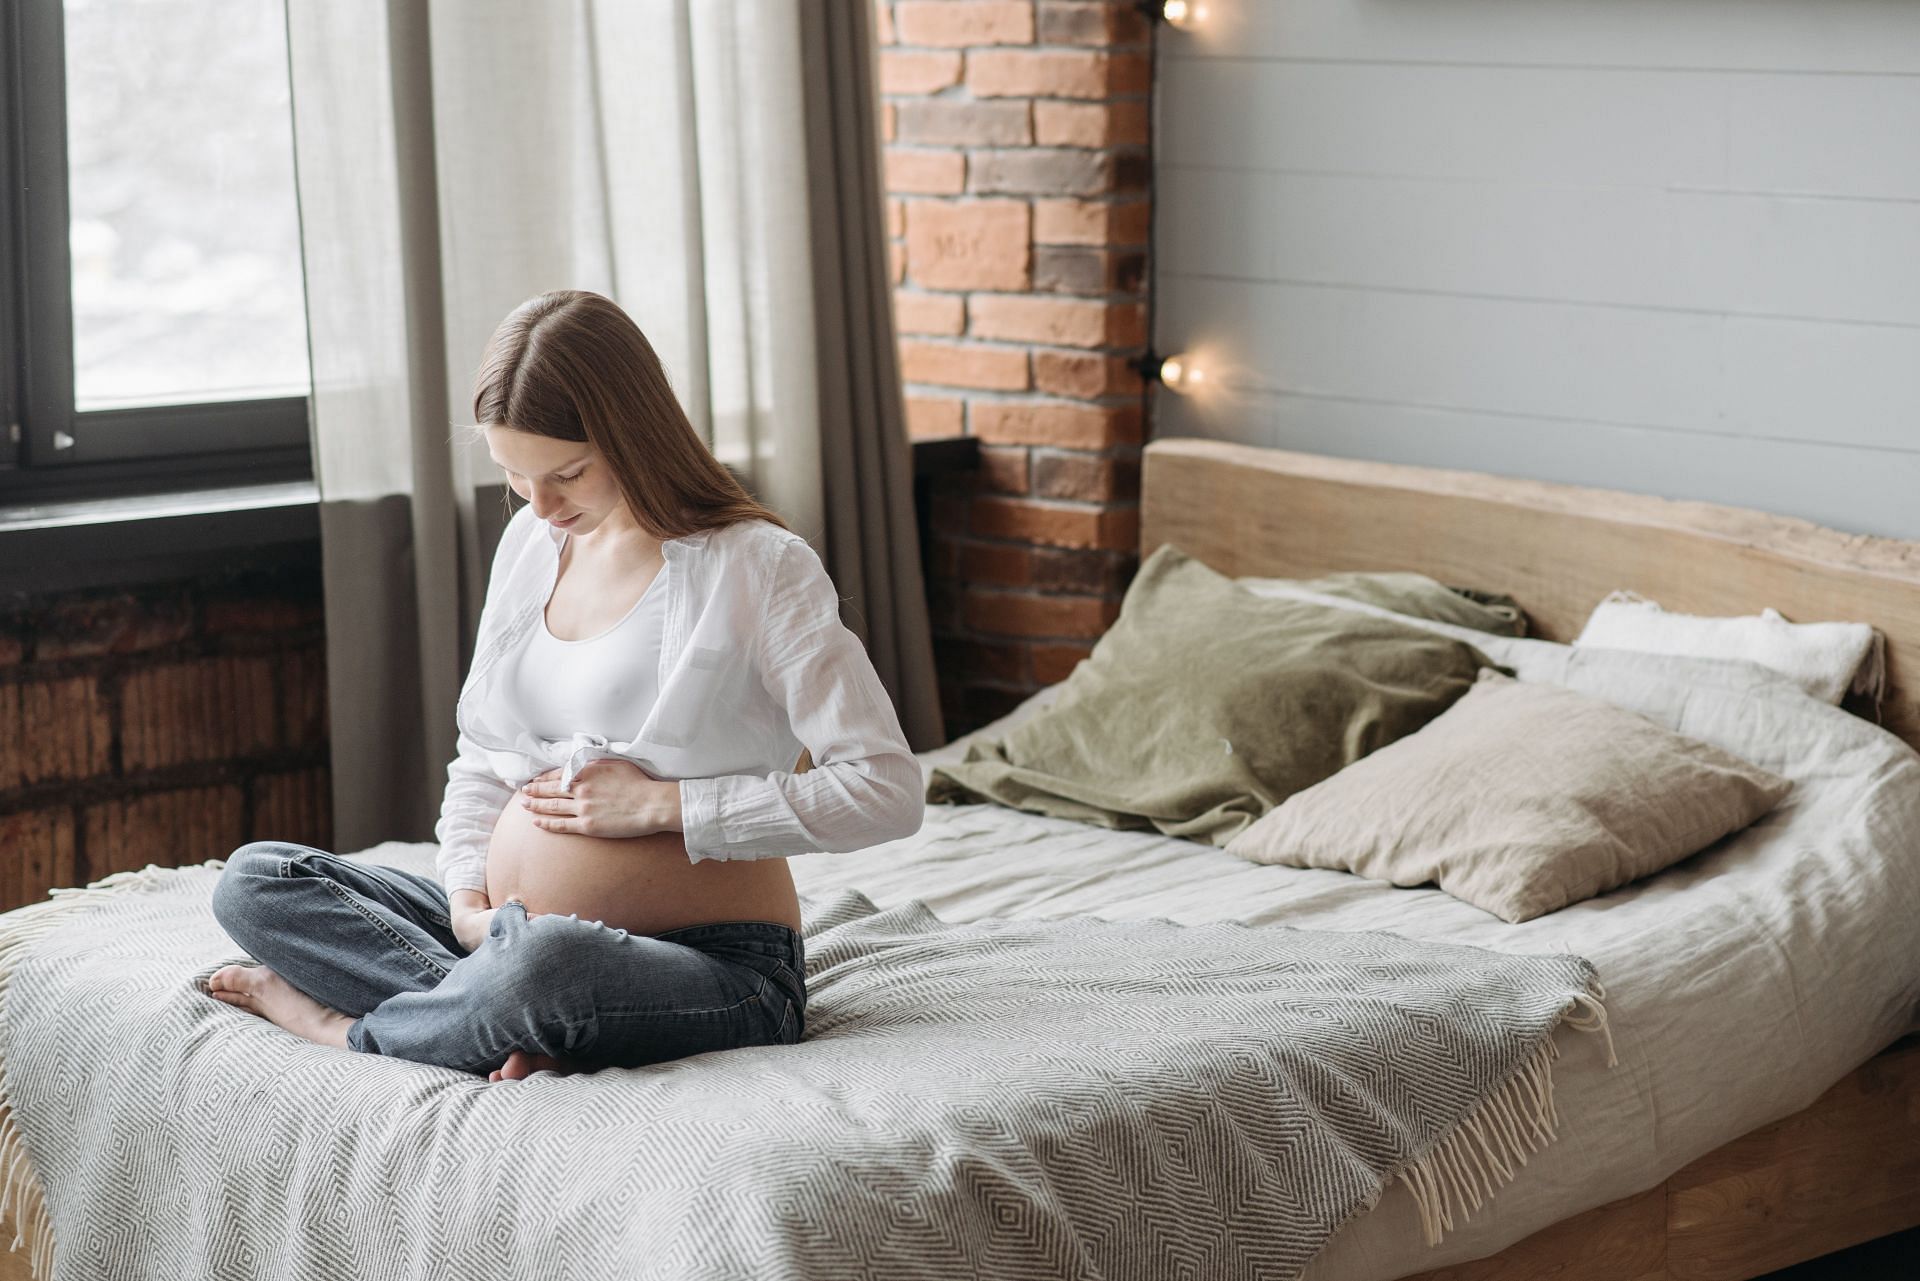 Being tired is also common during pregnancy. (Image via Pexels/ Pavel Danilyuk)